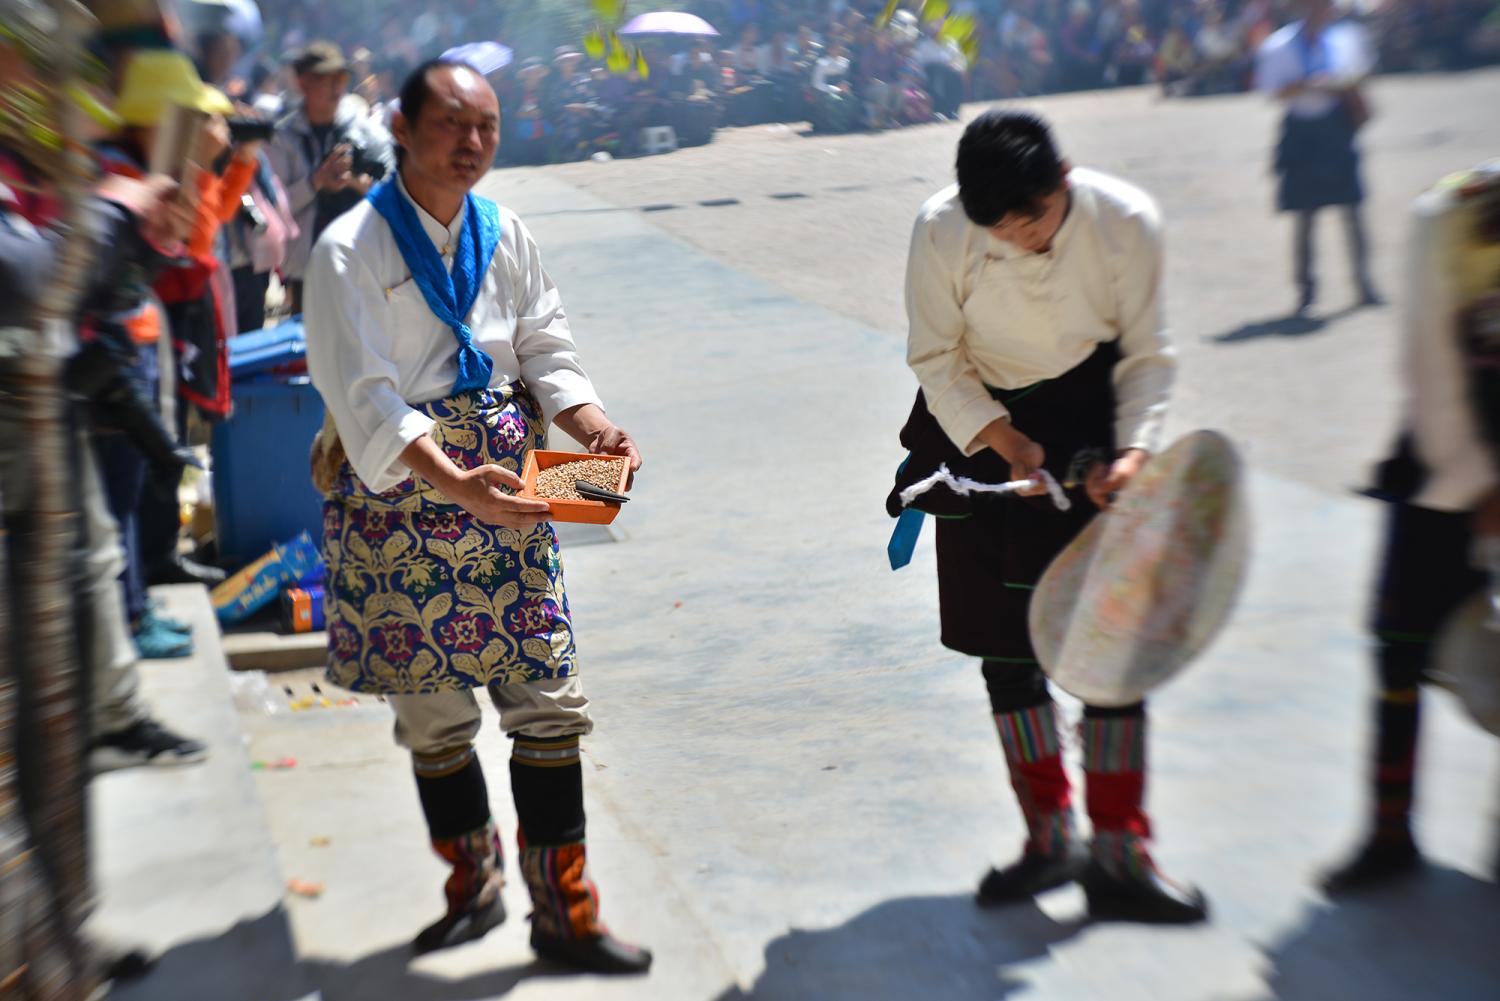 The La ba is pictured at left, holding a box of grain. He will shout and sputter his lips for the entire day as he carries out a number of ritual activities.